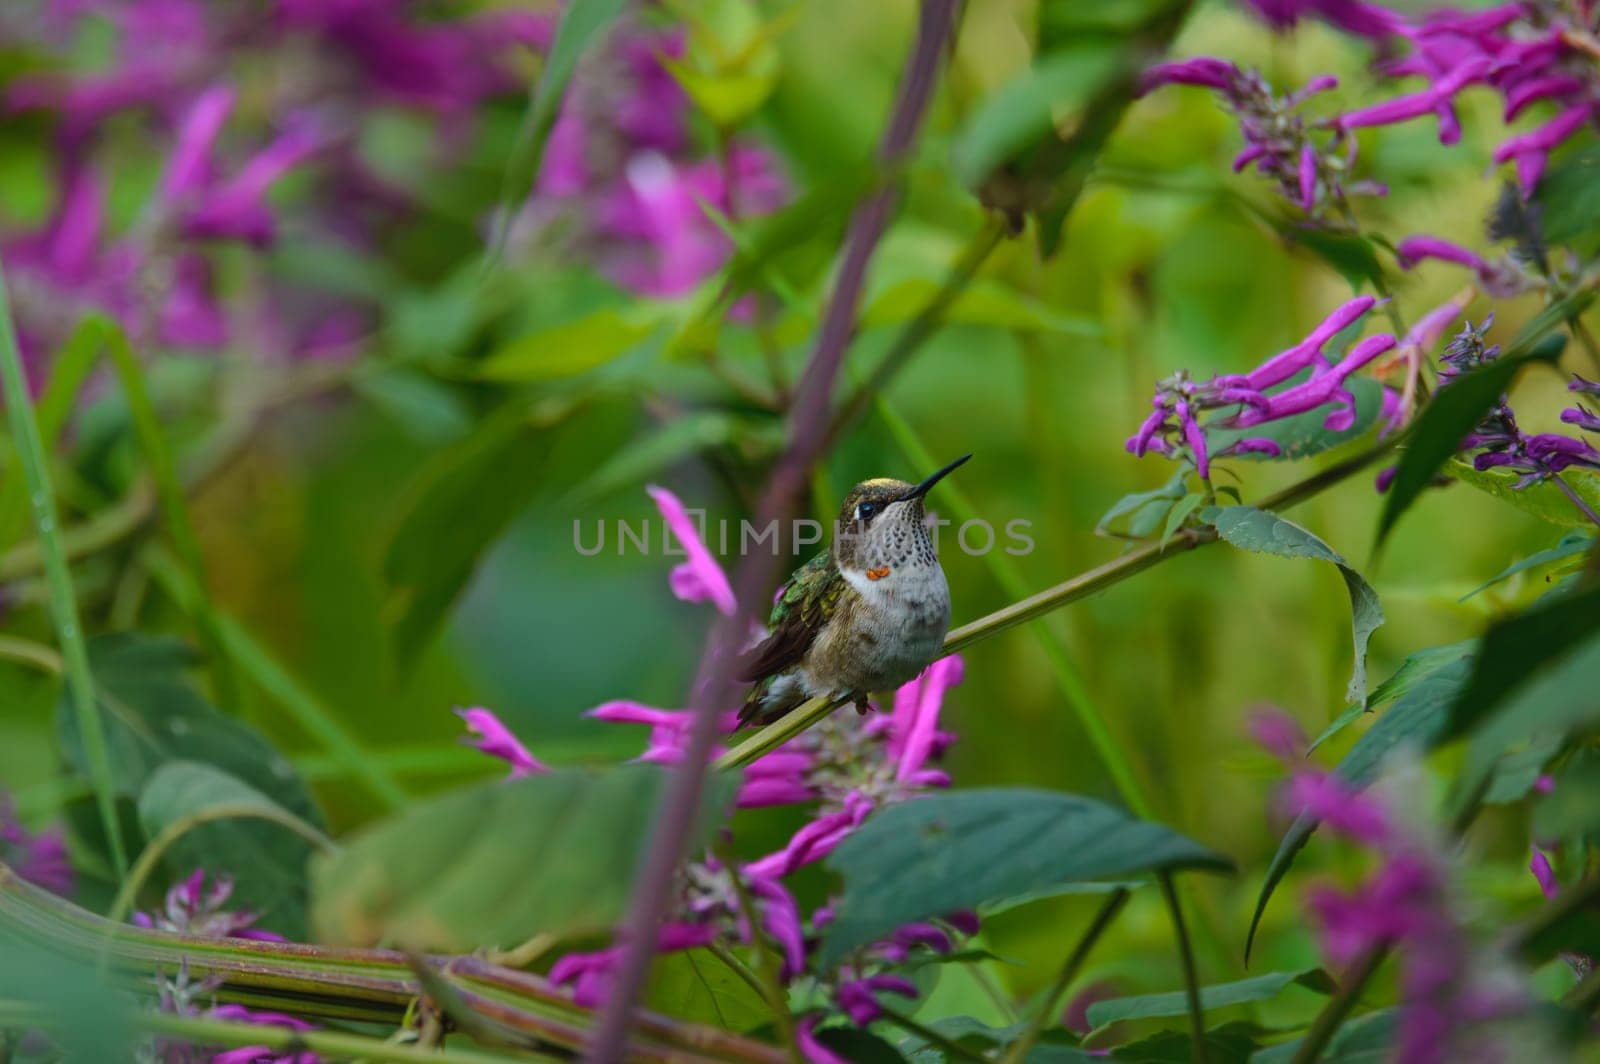 A close up of a female calliope hummingbird, Selasphorus calliope, perched amongst bushes and pink flowers in the Sierra de Juarez, Oaxaca, Mexico.